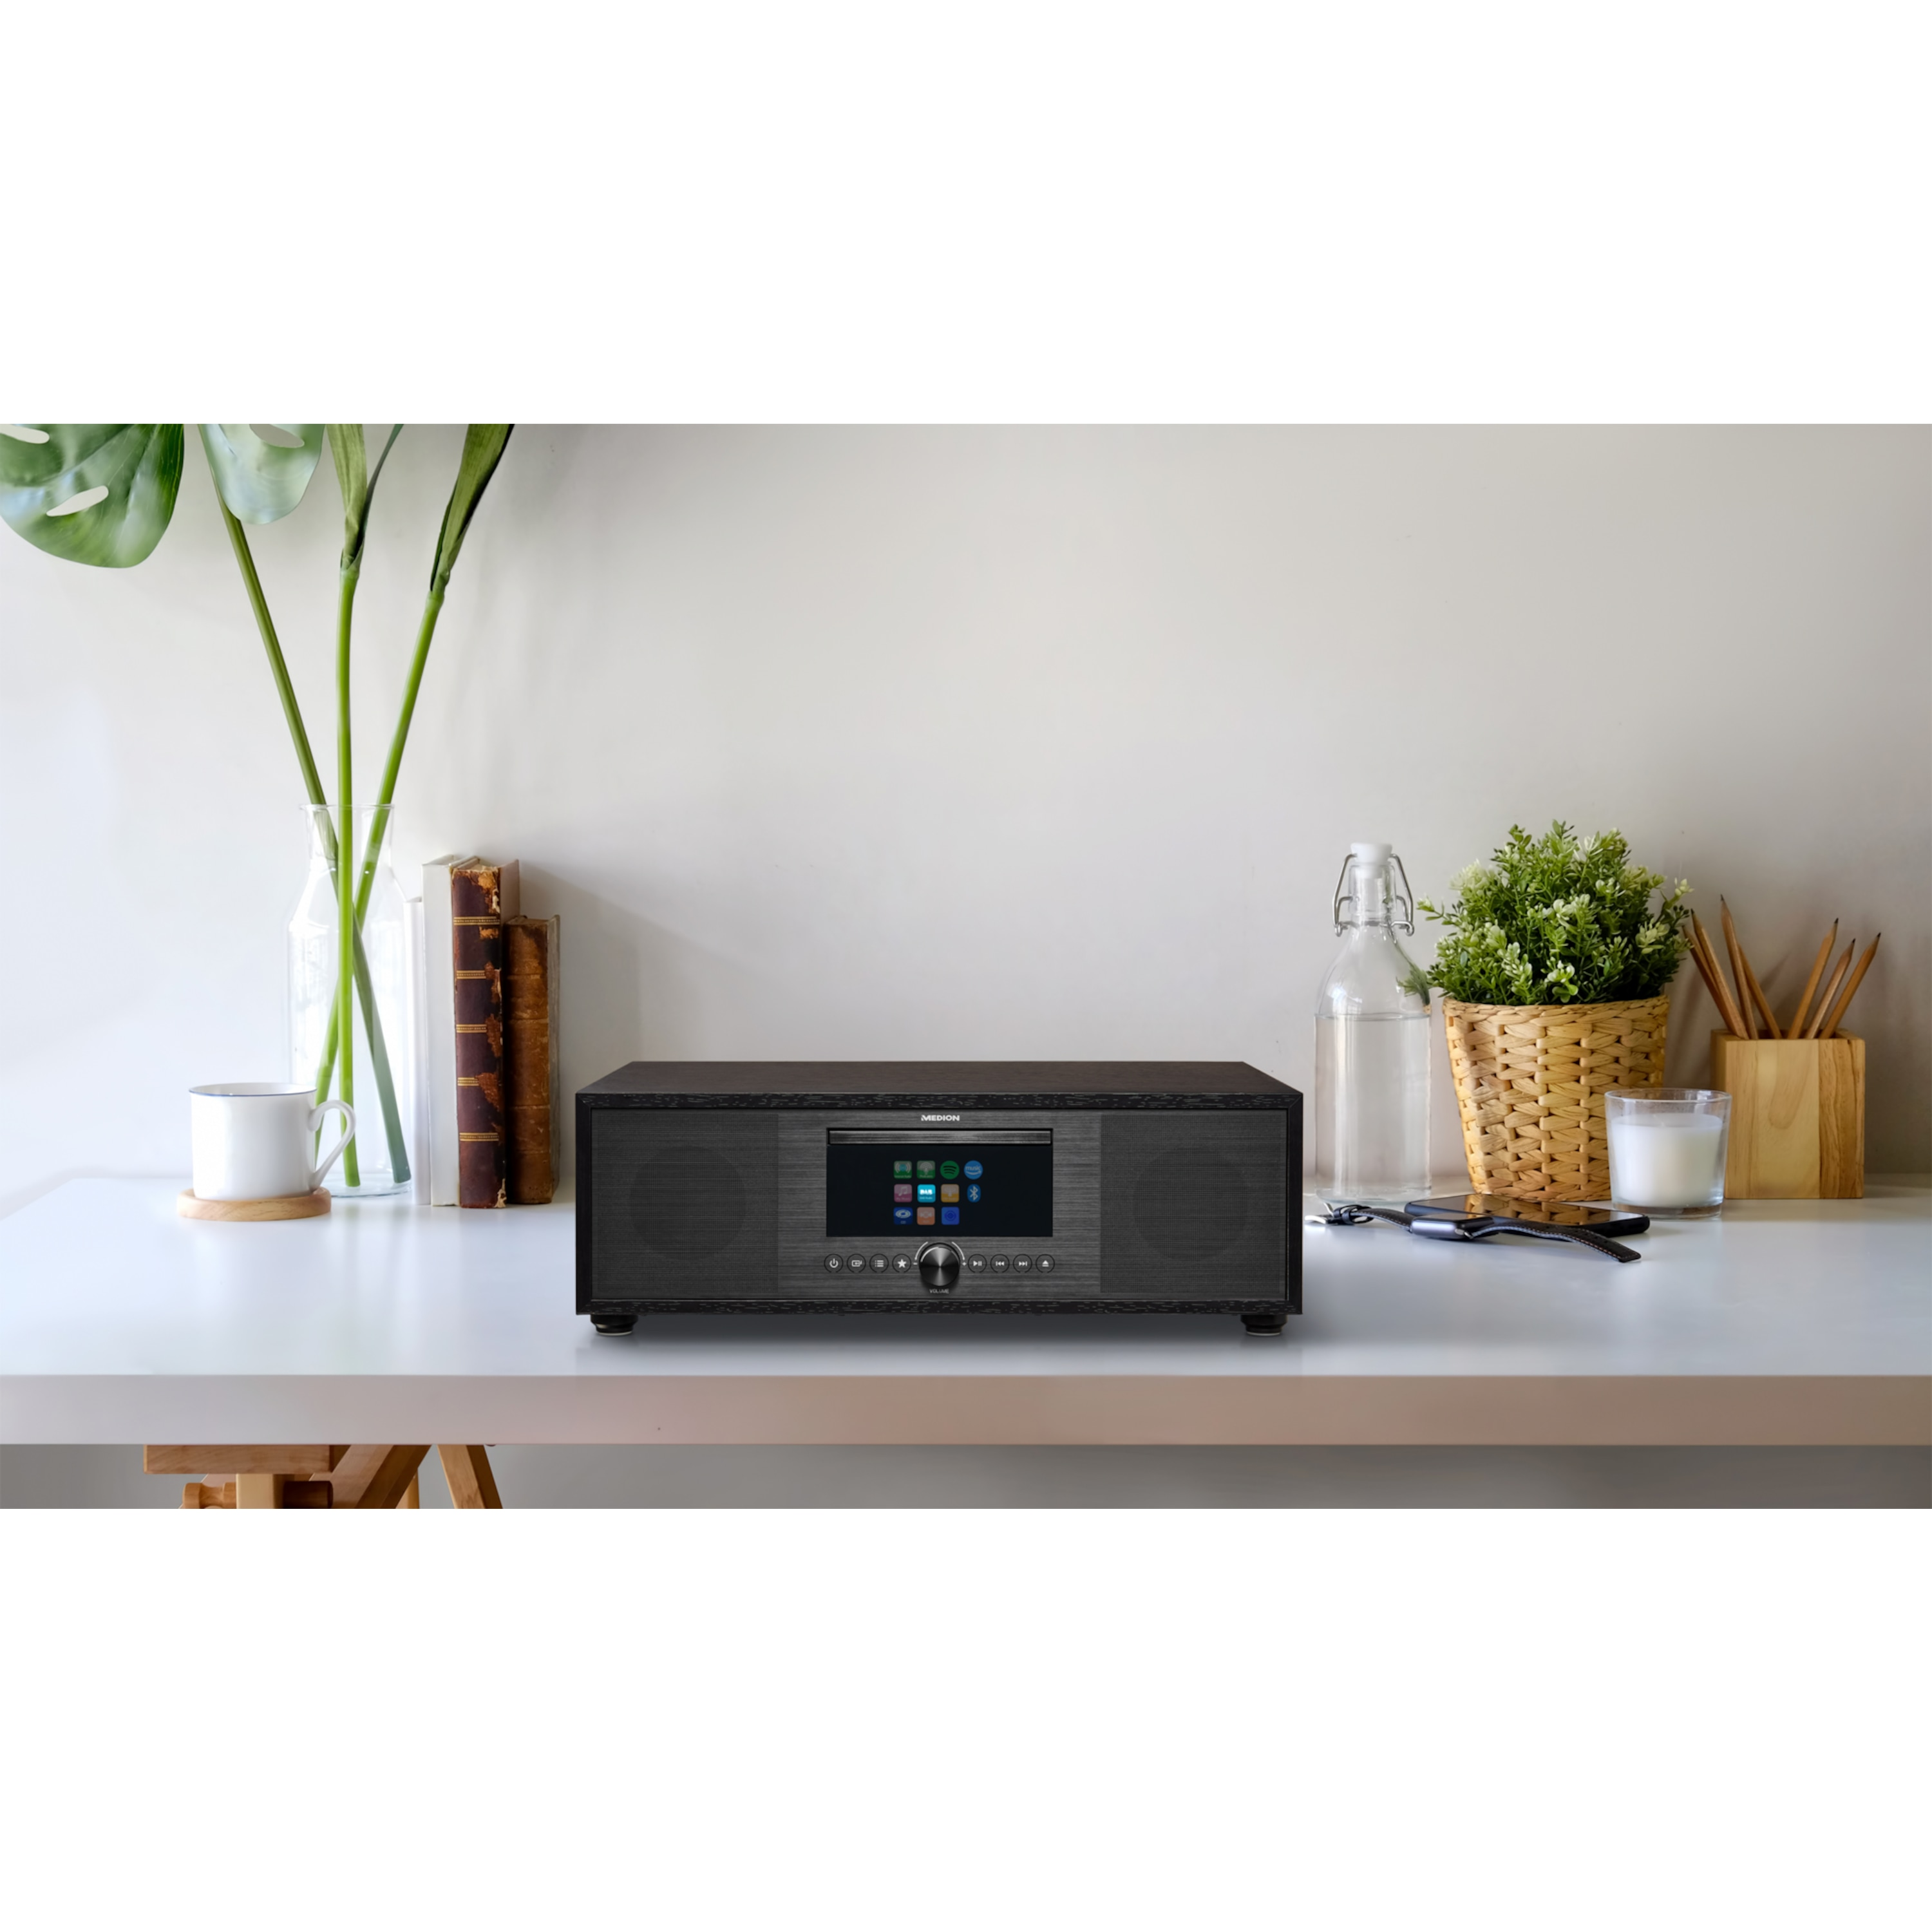 MEDION LIFE® P66400 All-in-One Audio Radio, CD/MP3- Internetradio, KW, WLAN Internet/DAB+/PLL-UKW Bluetooth®, System, Player, anthrazit